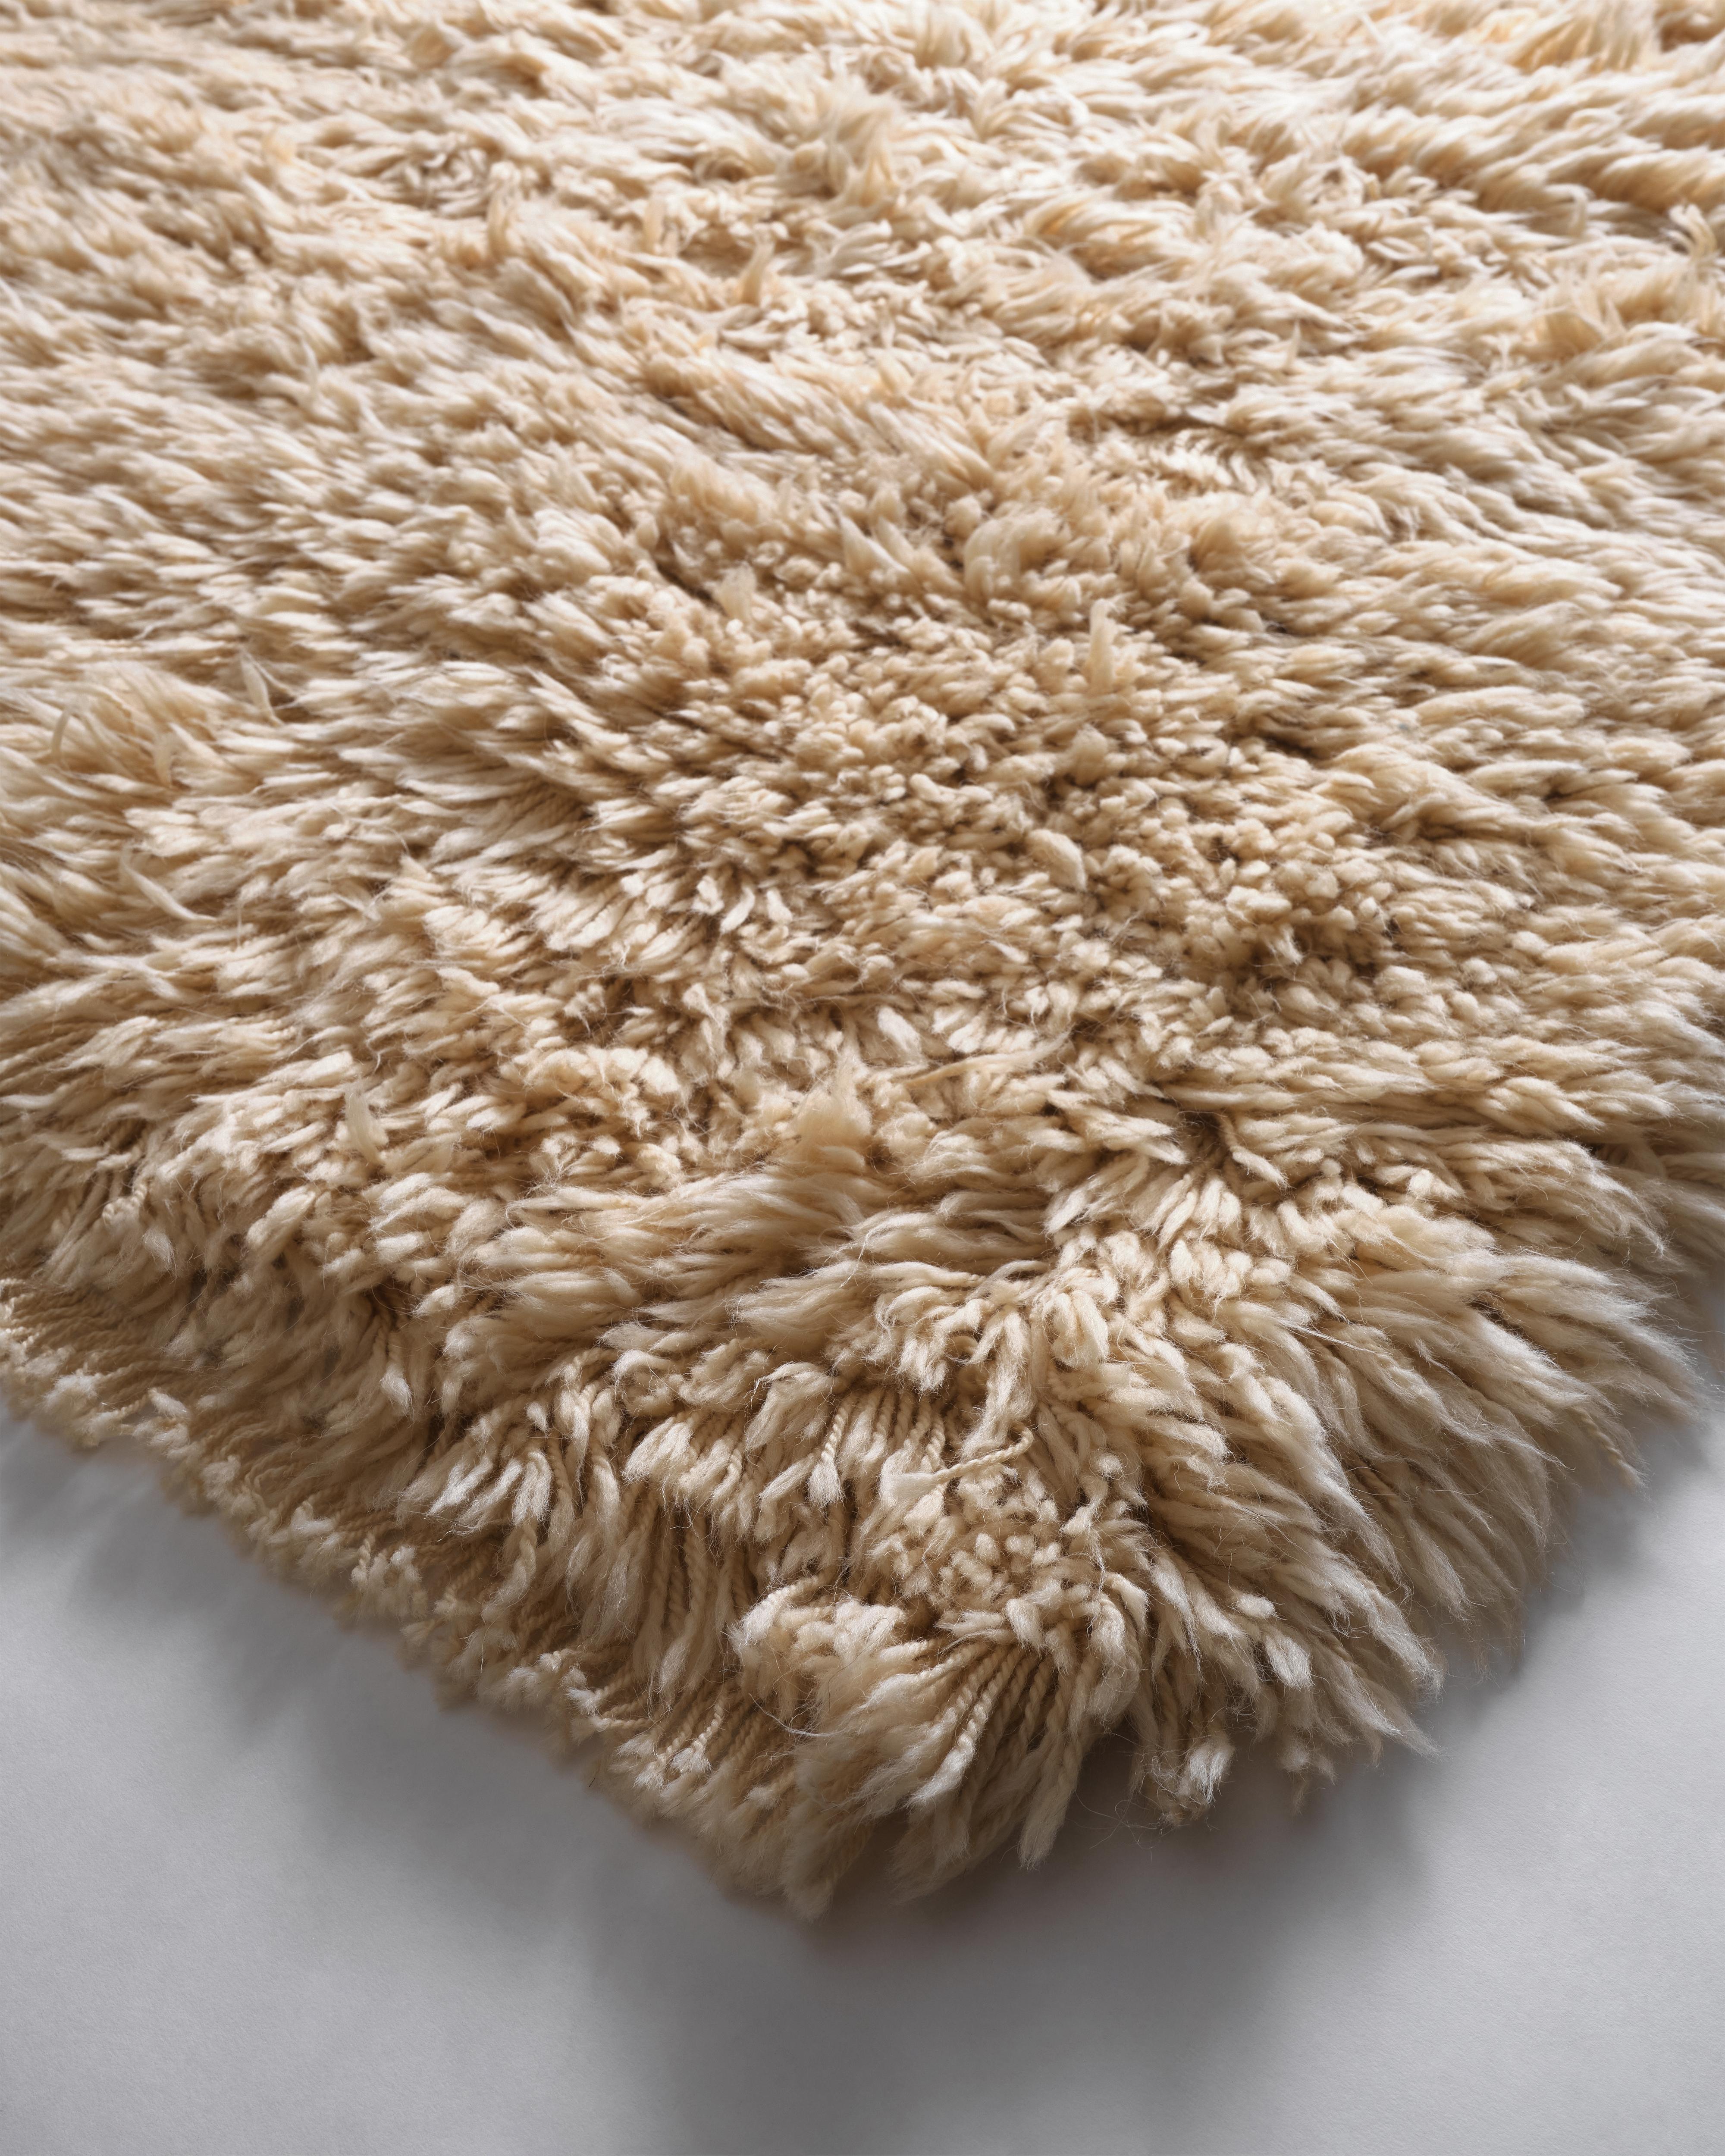 Introducing The Shag Rug collection. Anne and Maggie grew up with a 1970s Flokati rug their Mom shlepped home from Greece during her world travels. They've been wanting to recreate that style since day one - a thick, high pile, 70s, run your fingers